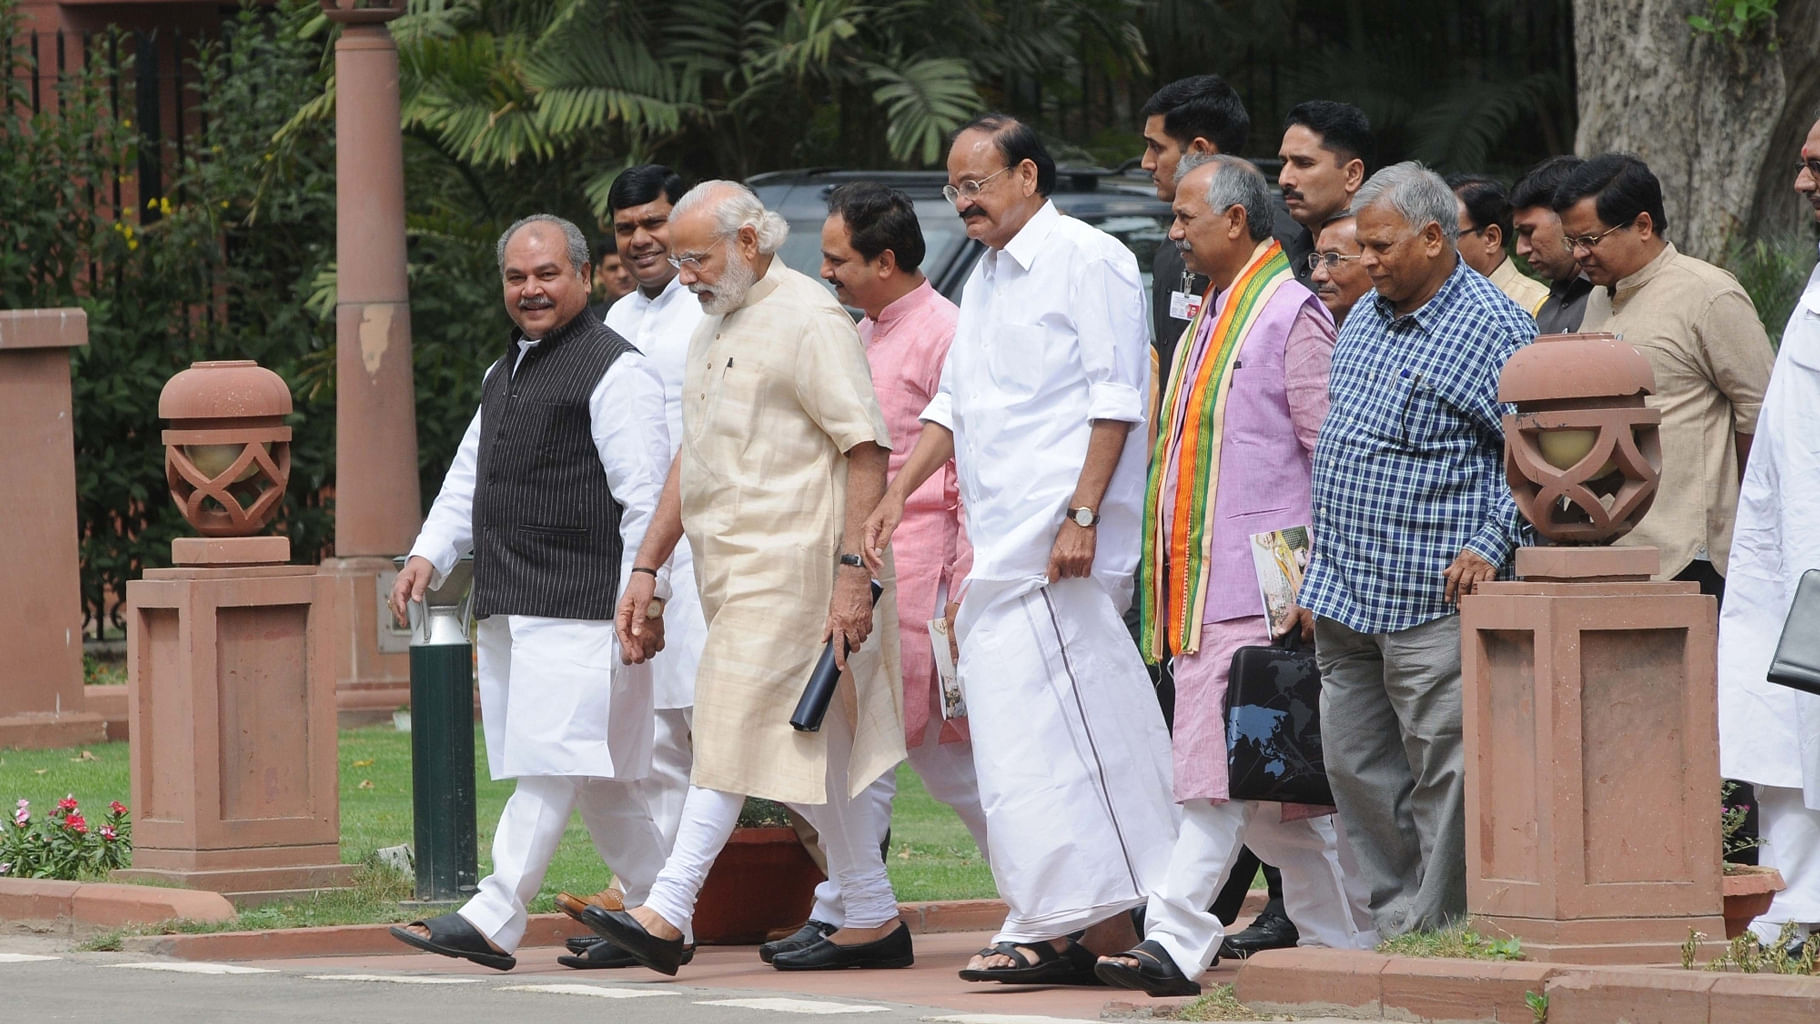 Prime Minister Narendra Modi with cabinet members and others outside the Parliament. (Photo: IANS)